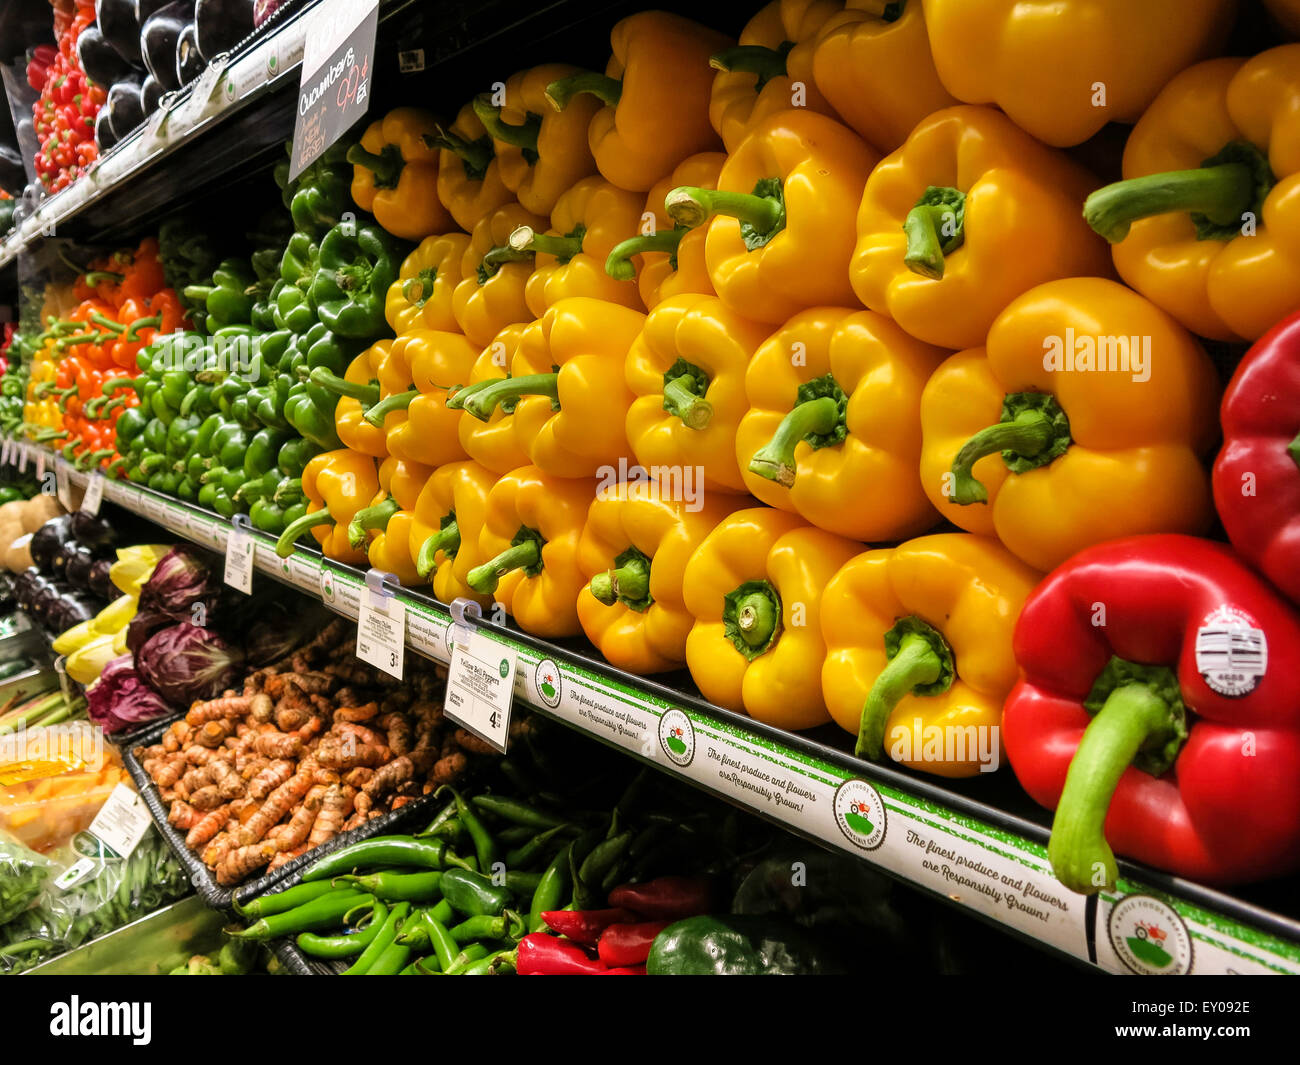 https://c8.alamy.com/comp/EY092E/red-and-yellow-bell-peppers-display-fresh-produce-section-in-grocery-EY092E.jpg